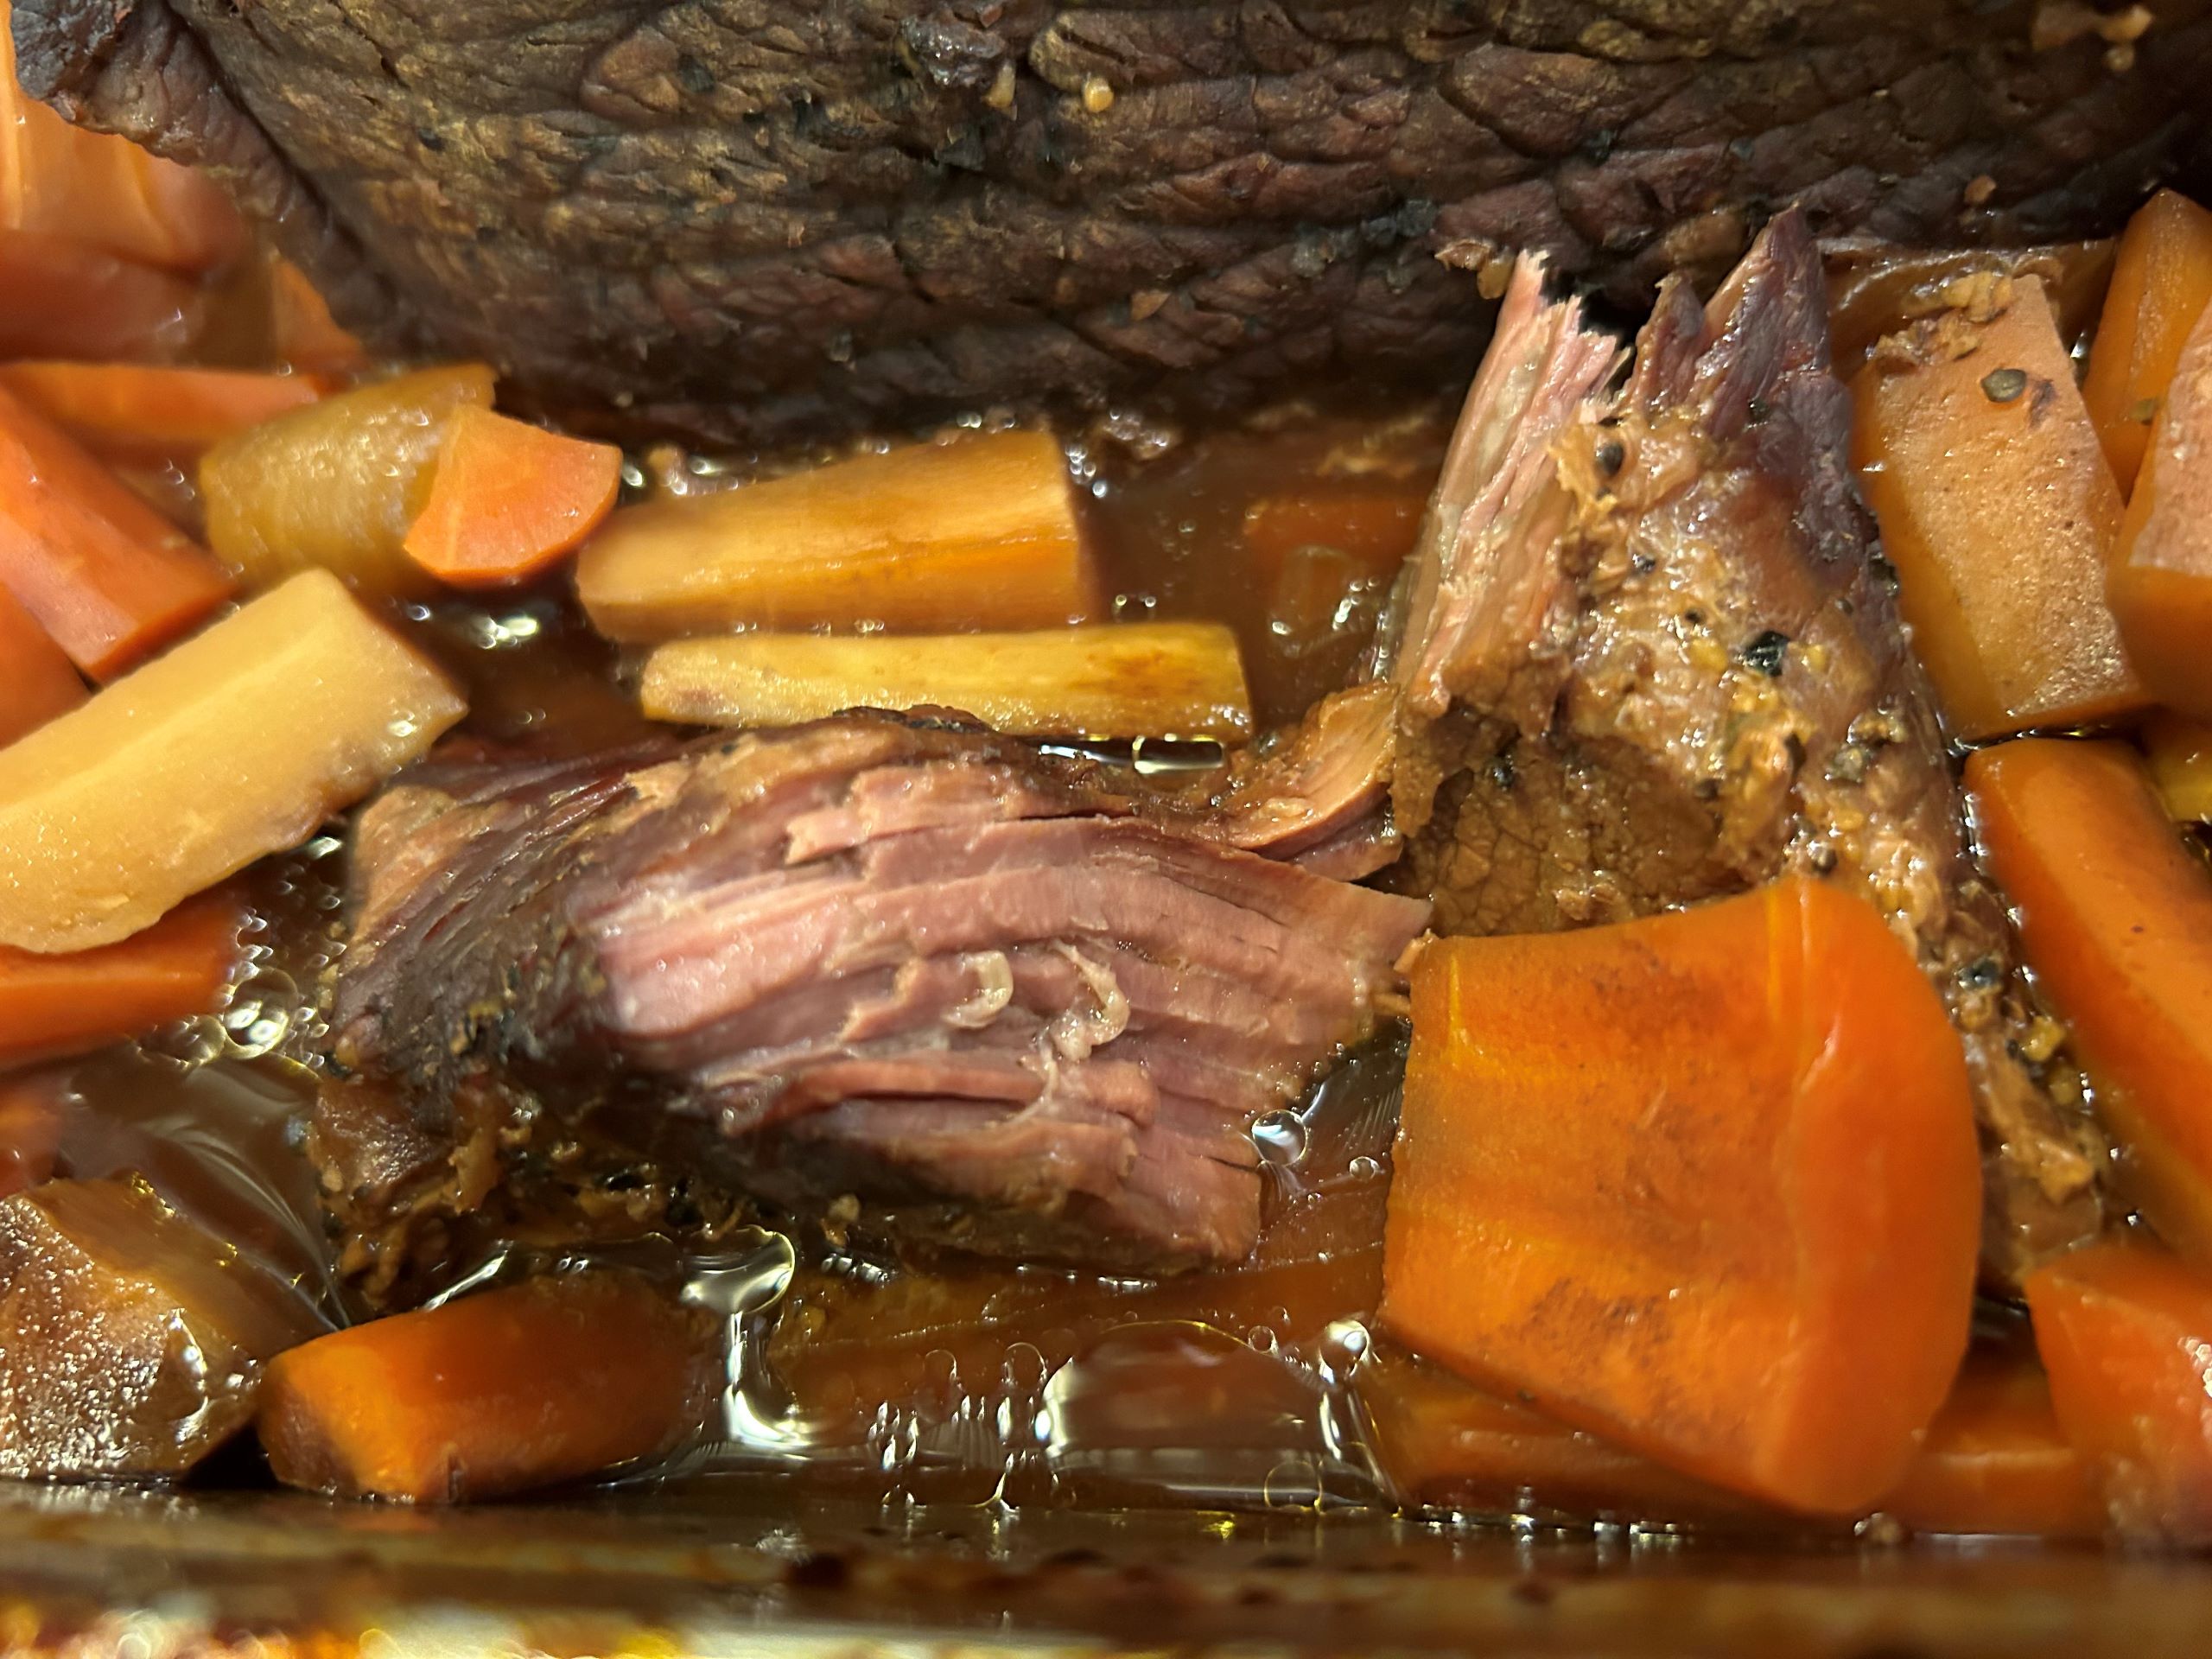 Kat's Baked Brisket right out of the oven with the juices still bubbling and vegetables pieces such as cooked carrots, garlic, onions, peppercorn seasoning, and a chunk of tender meat showing the stringy goodness and right color of the brisket meat when cooked.